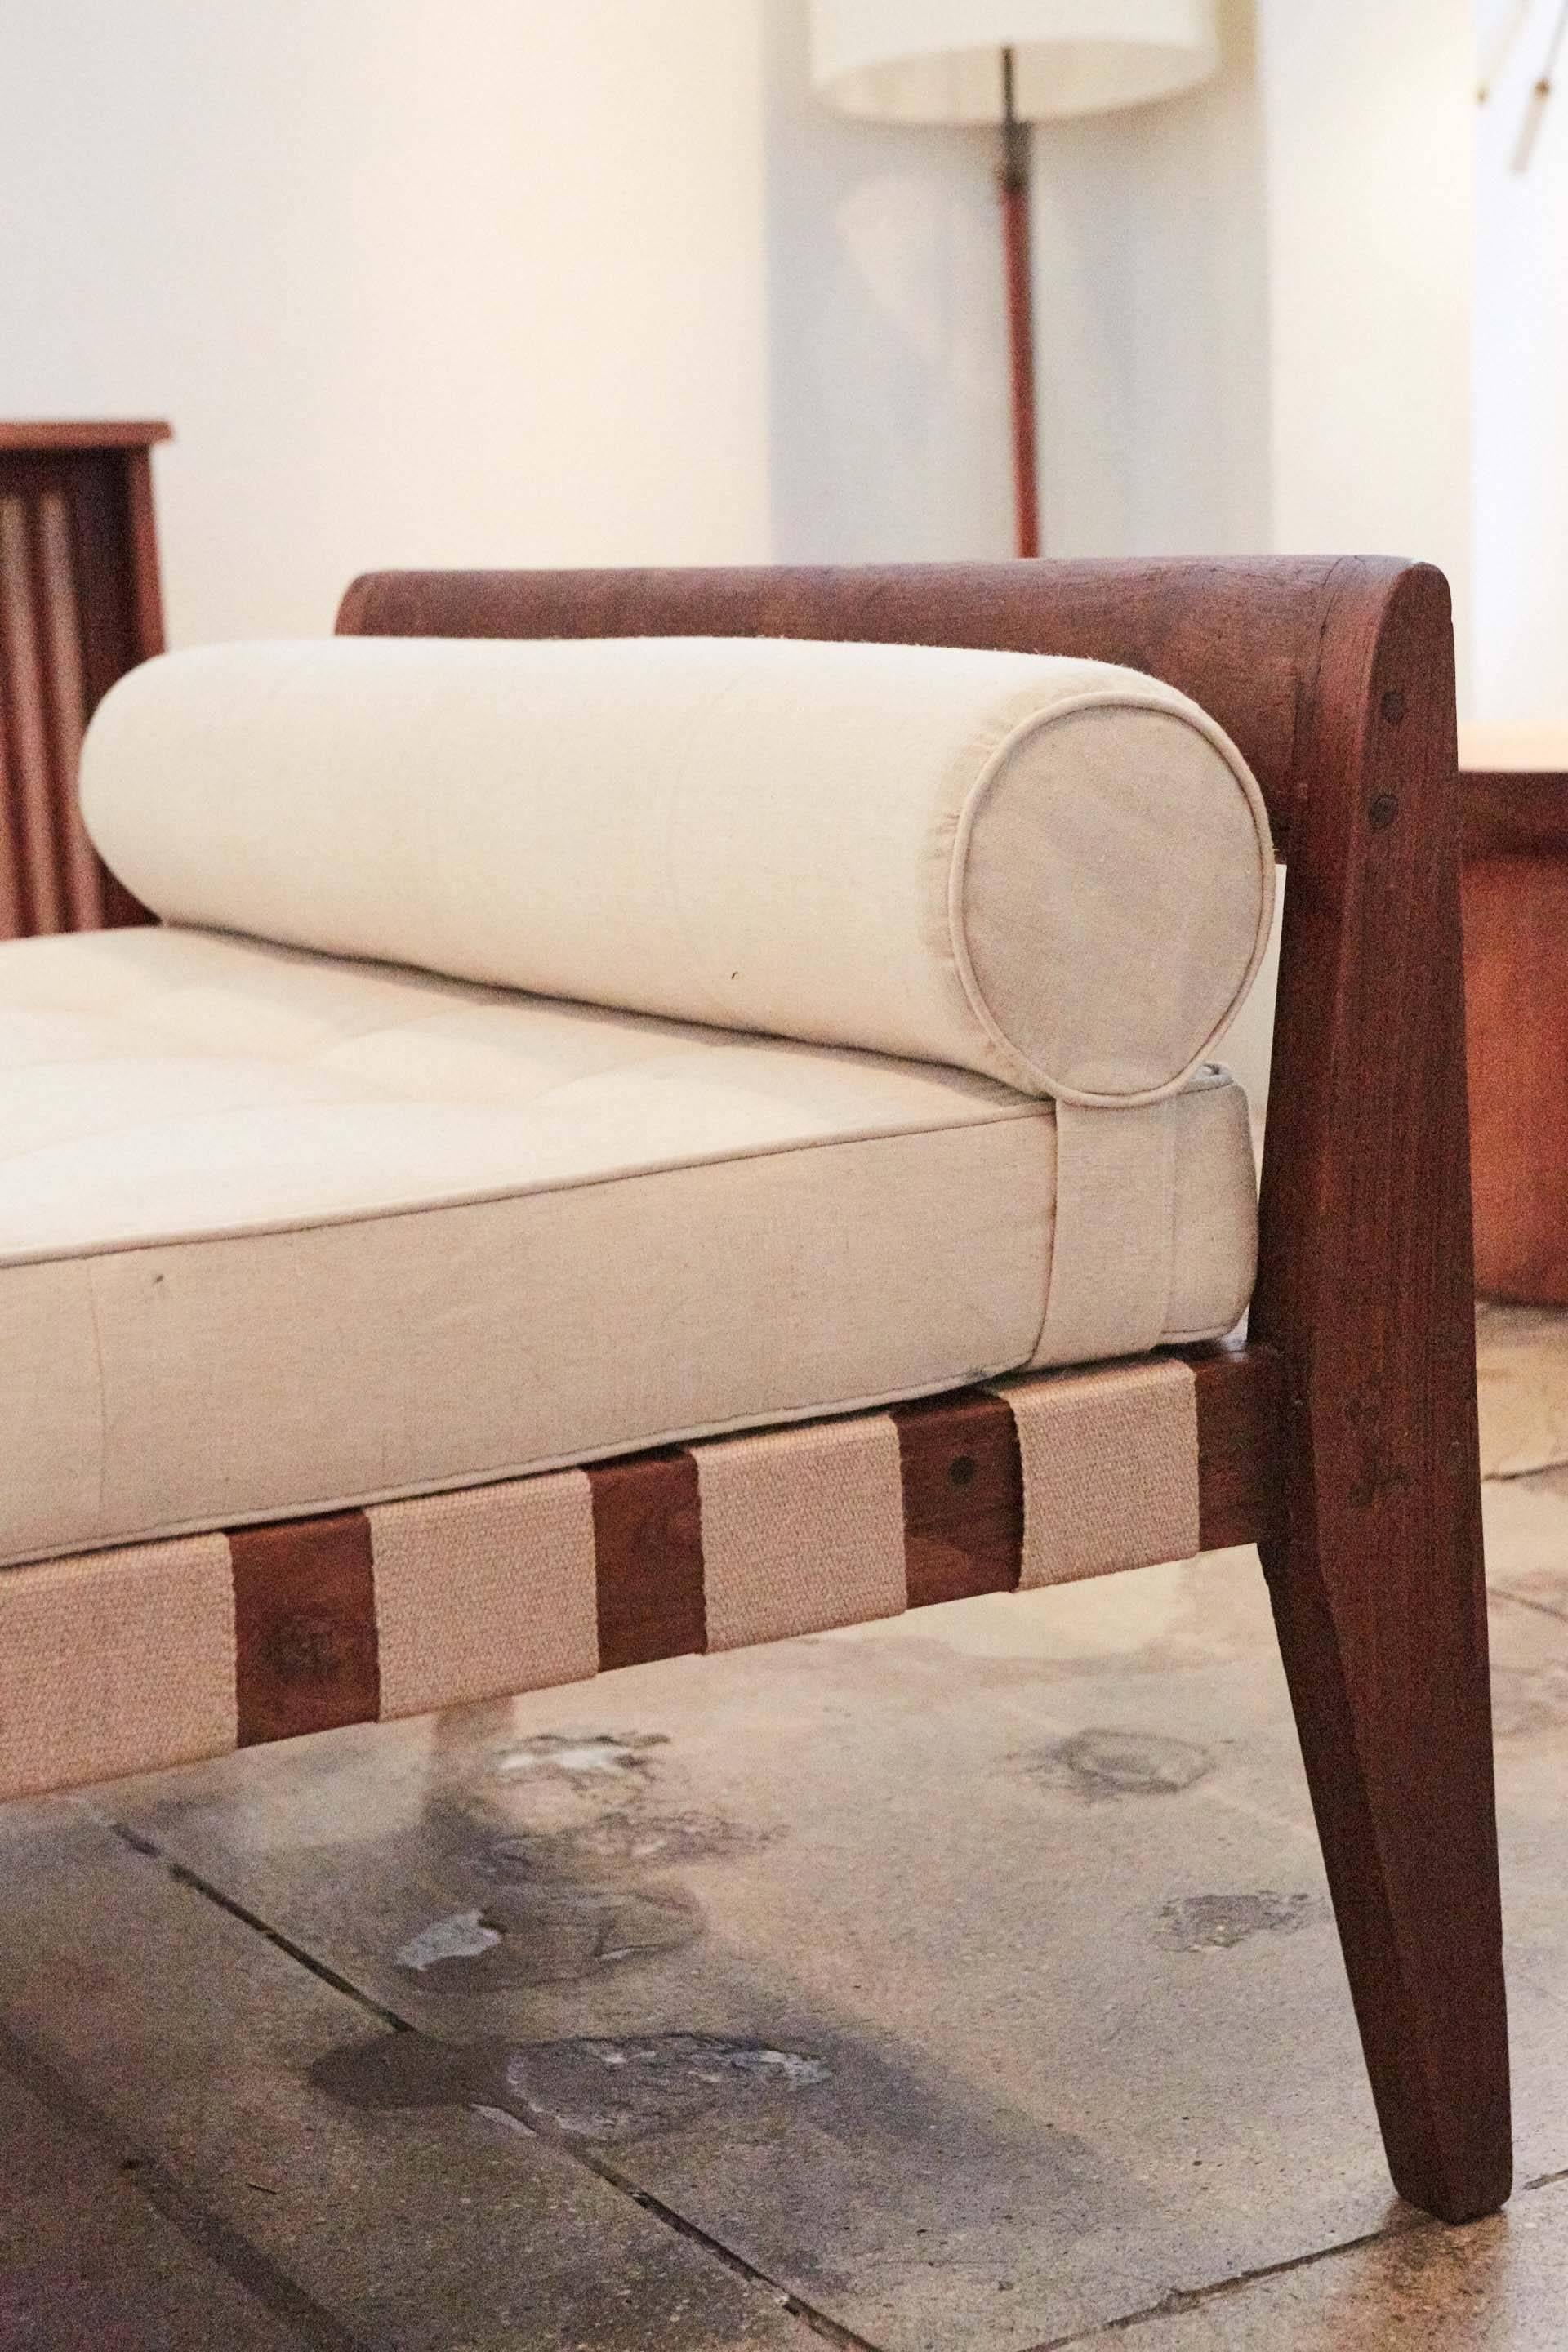 Mid-20th Century Daybed from Chandigarh, Pierre Jeanneret & Le Corbusier, France / India, 1956